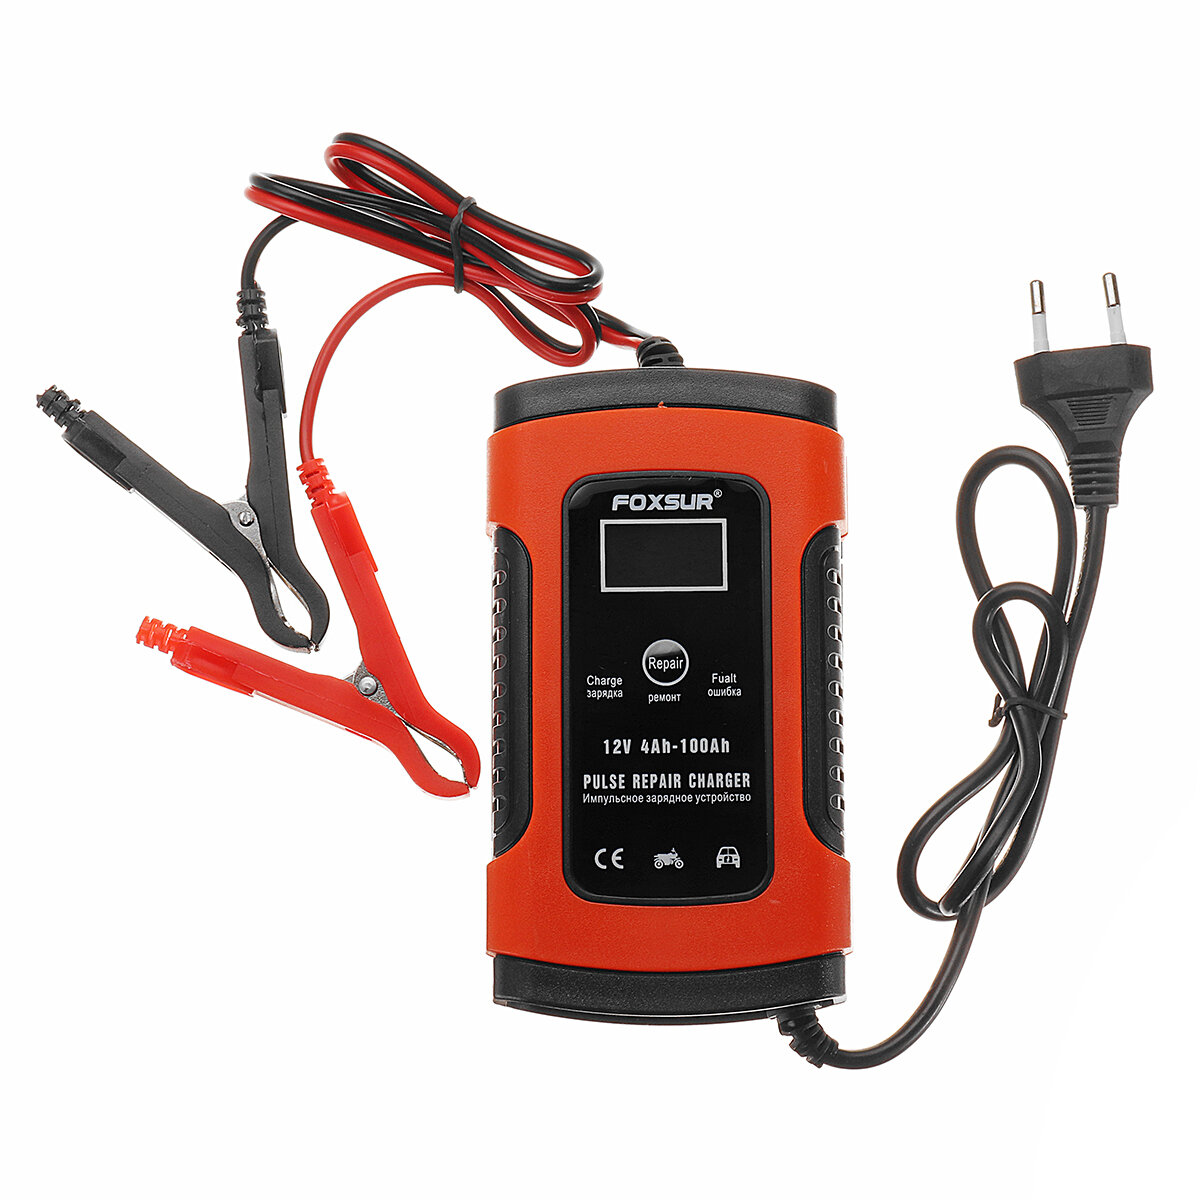 

110-220V Intelligent Battery Charger 12V 5A Pulse Repair Battery Charging with LCD Display